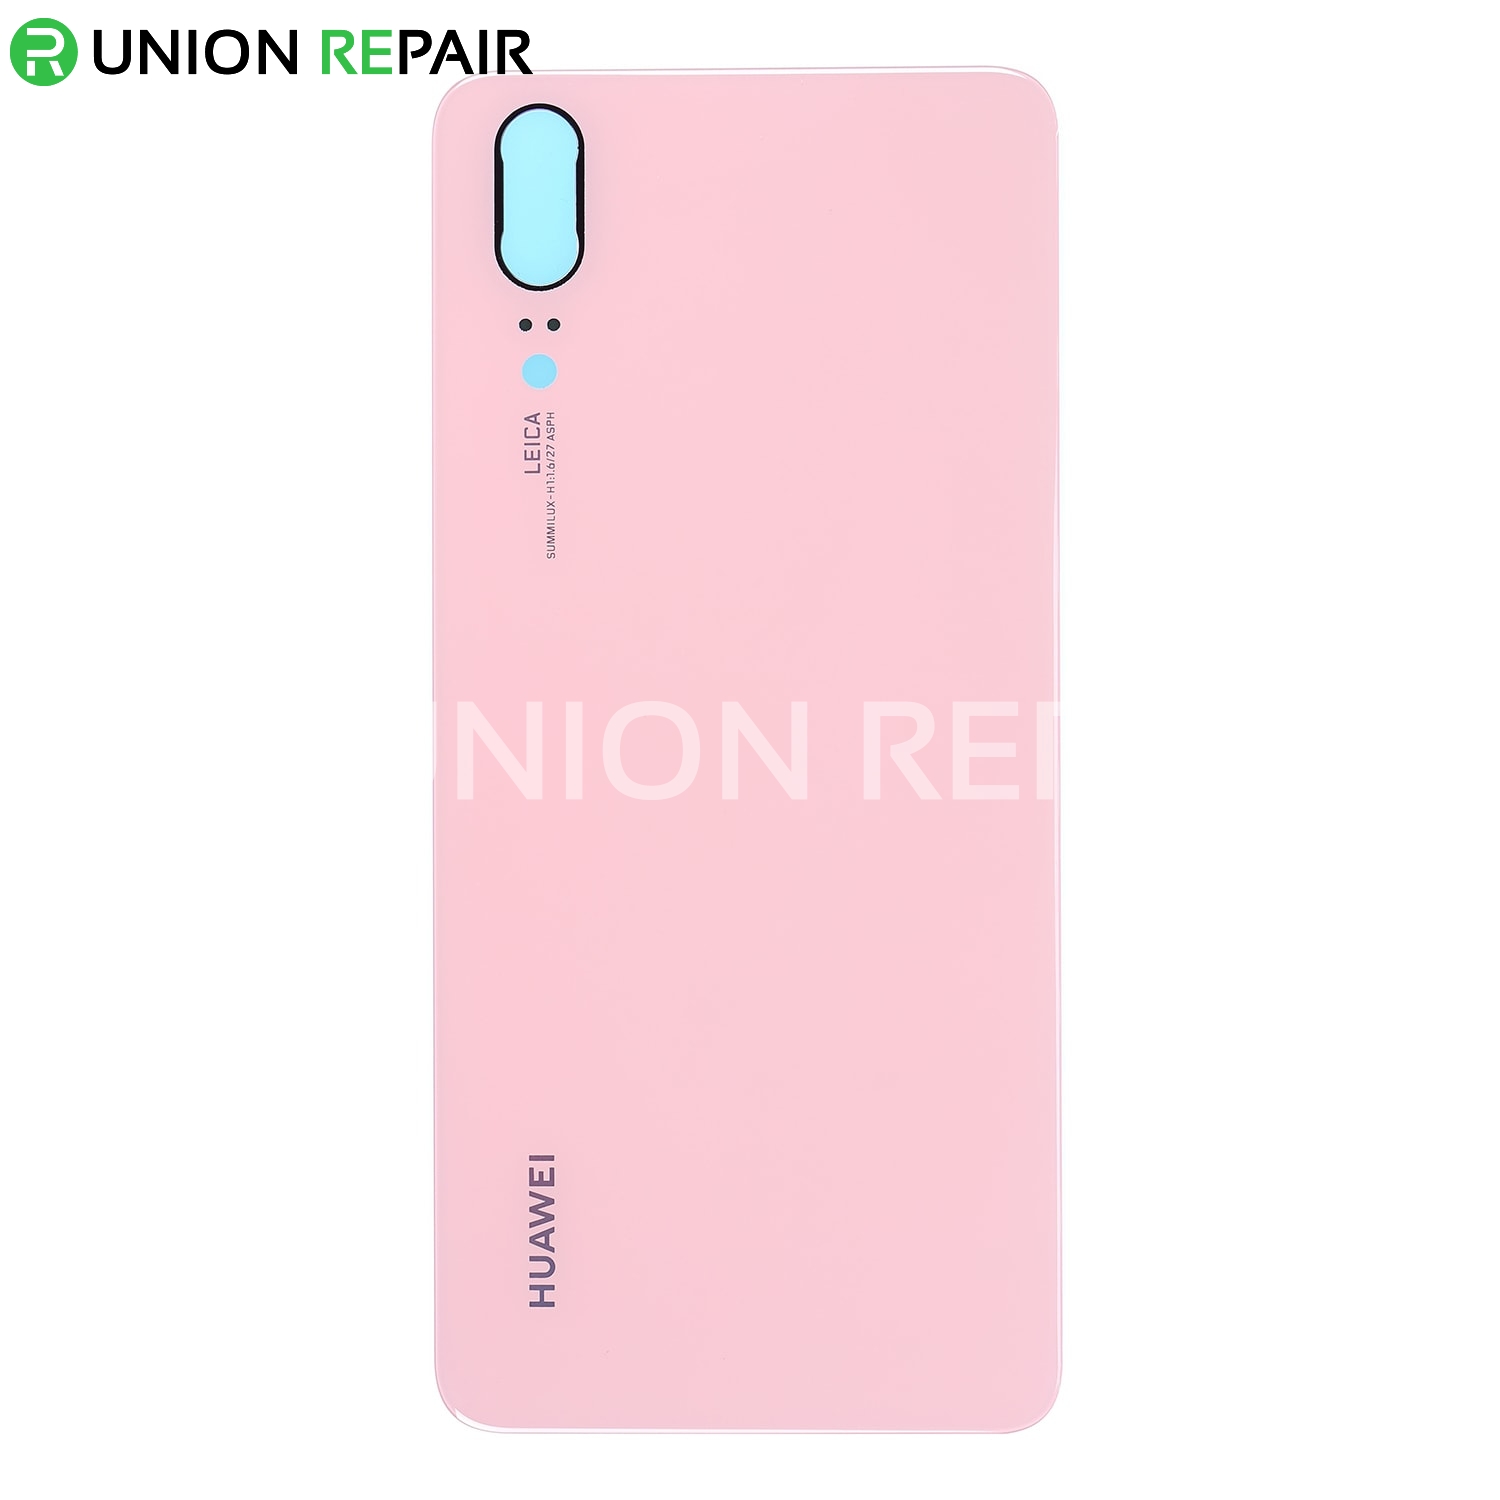 Replacement for Huawei P20 Battery Door - Pink Gold